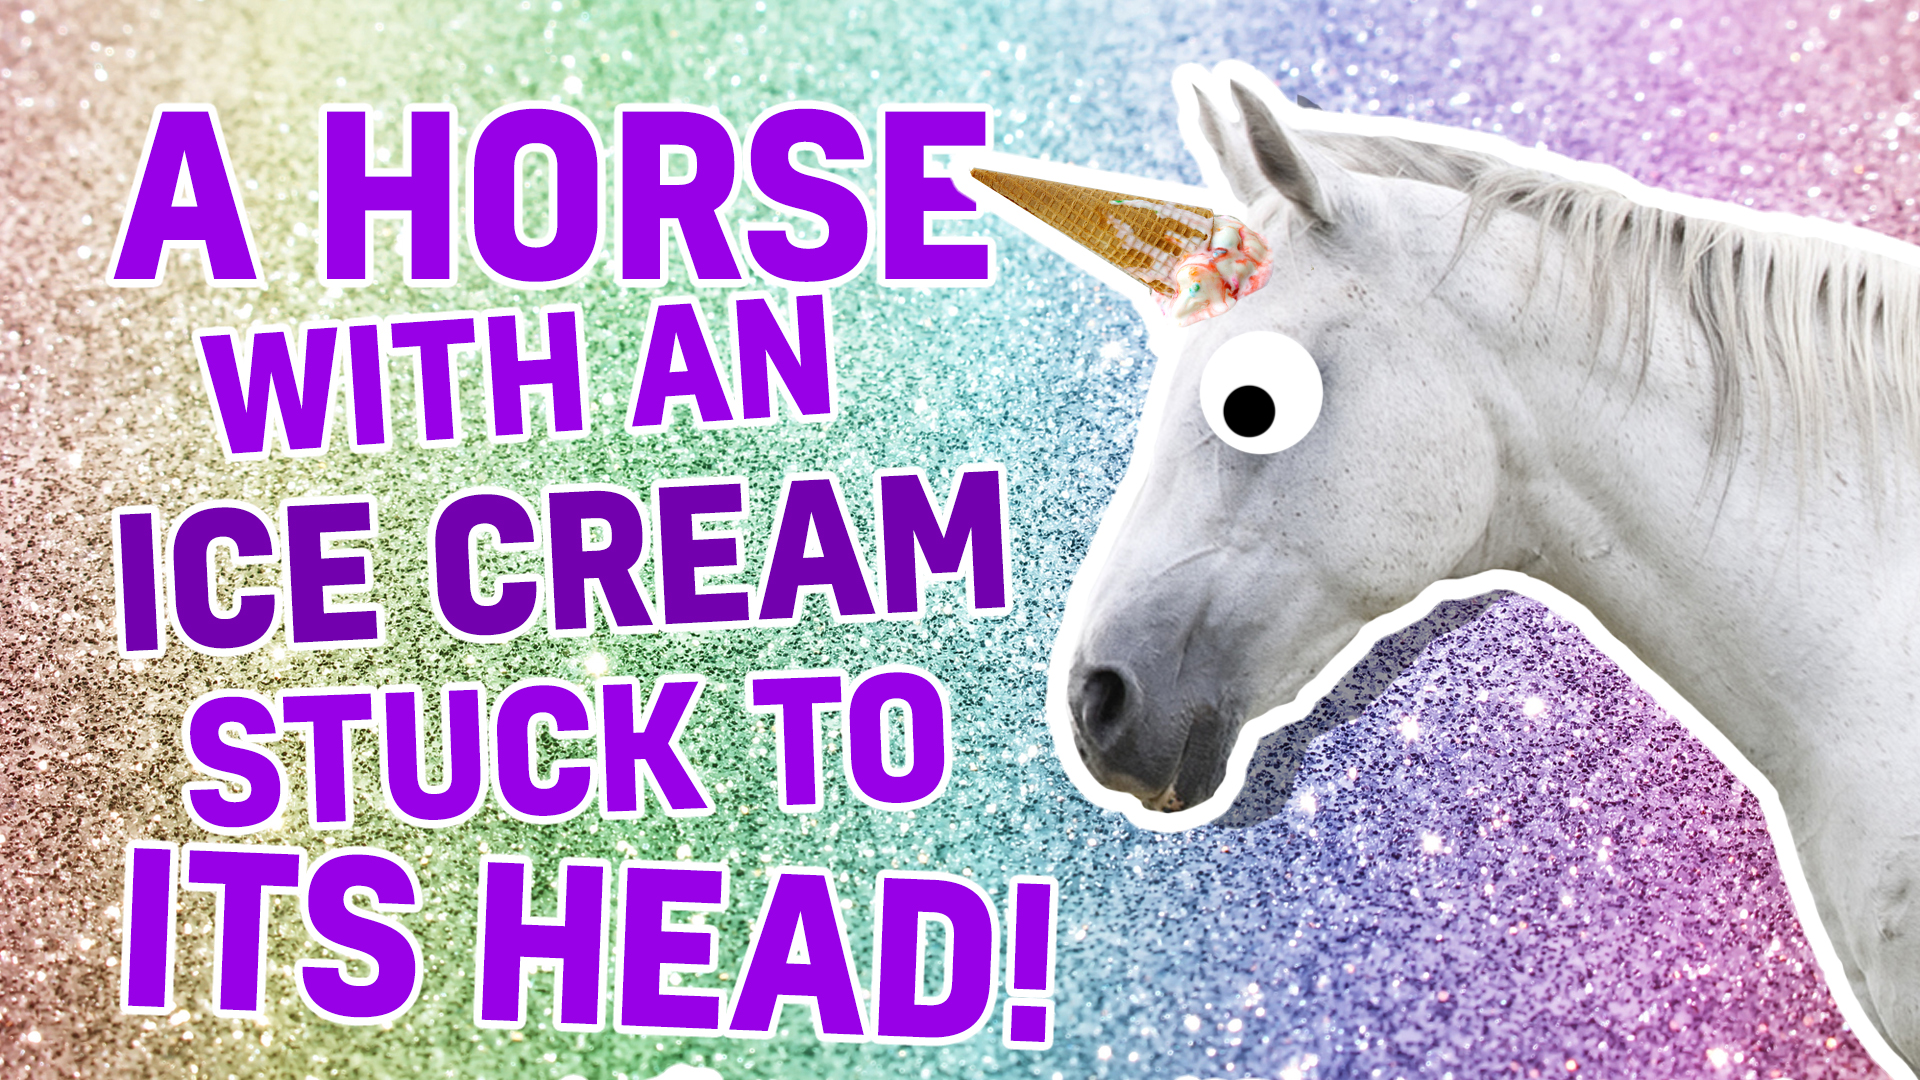 A horse with an ice cream stuck to its head